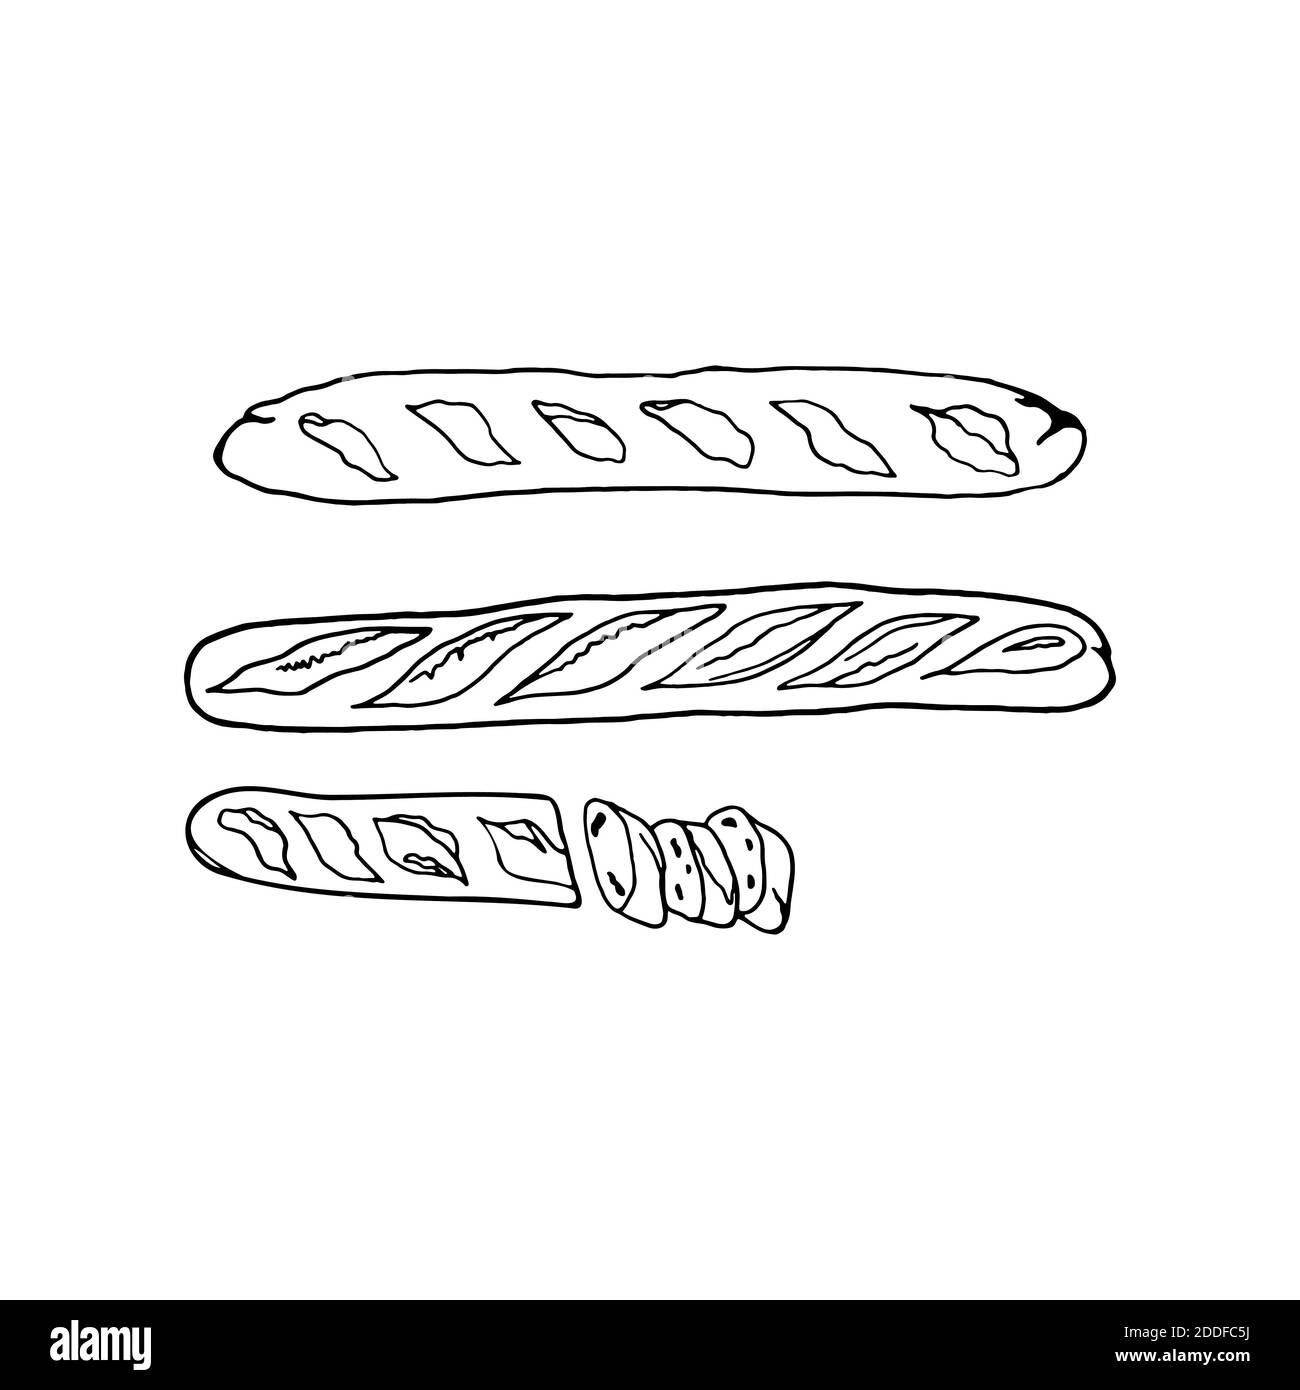 Vector hand drawn baguette. French cuisine dish. Design sketch element for menu cafe, bistro, restaurant, bakery, label and packaging. Illustration on Stock Vector